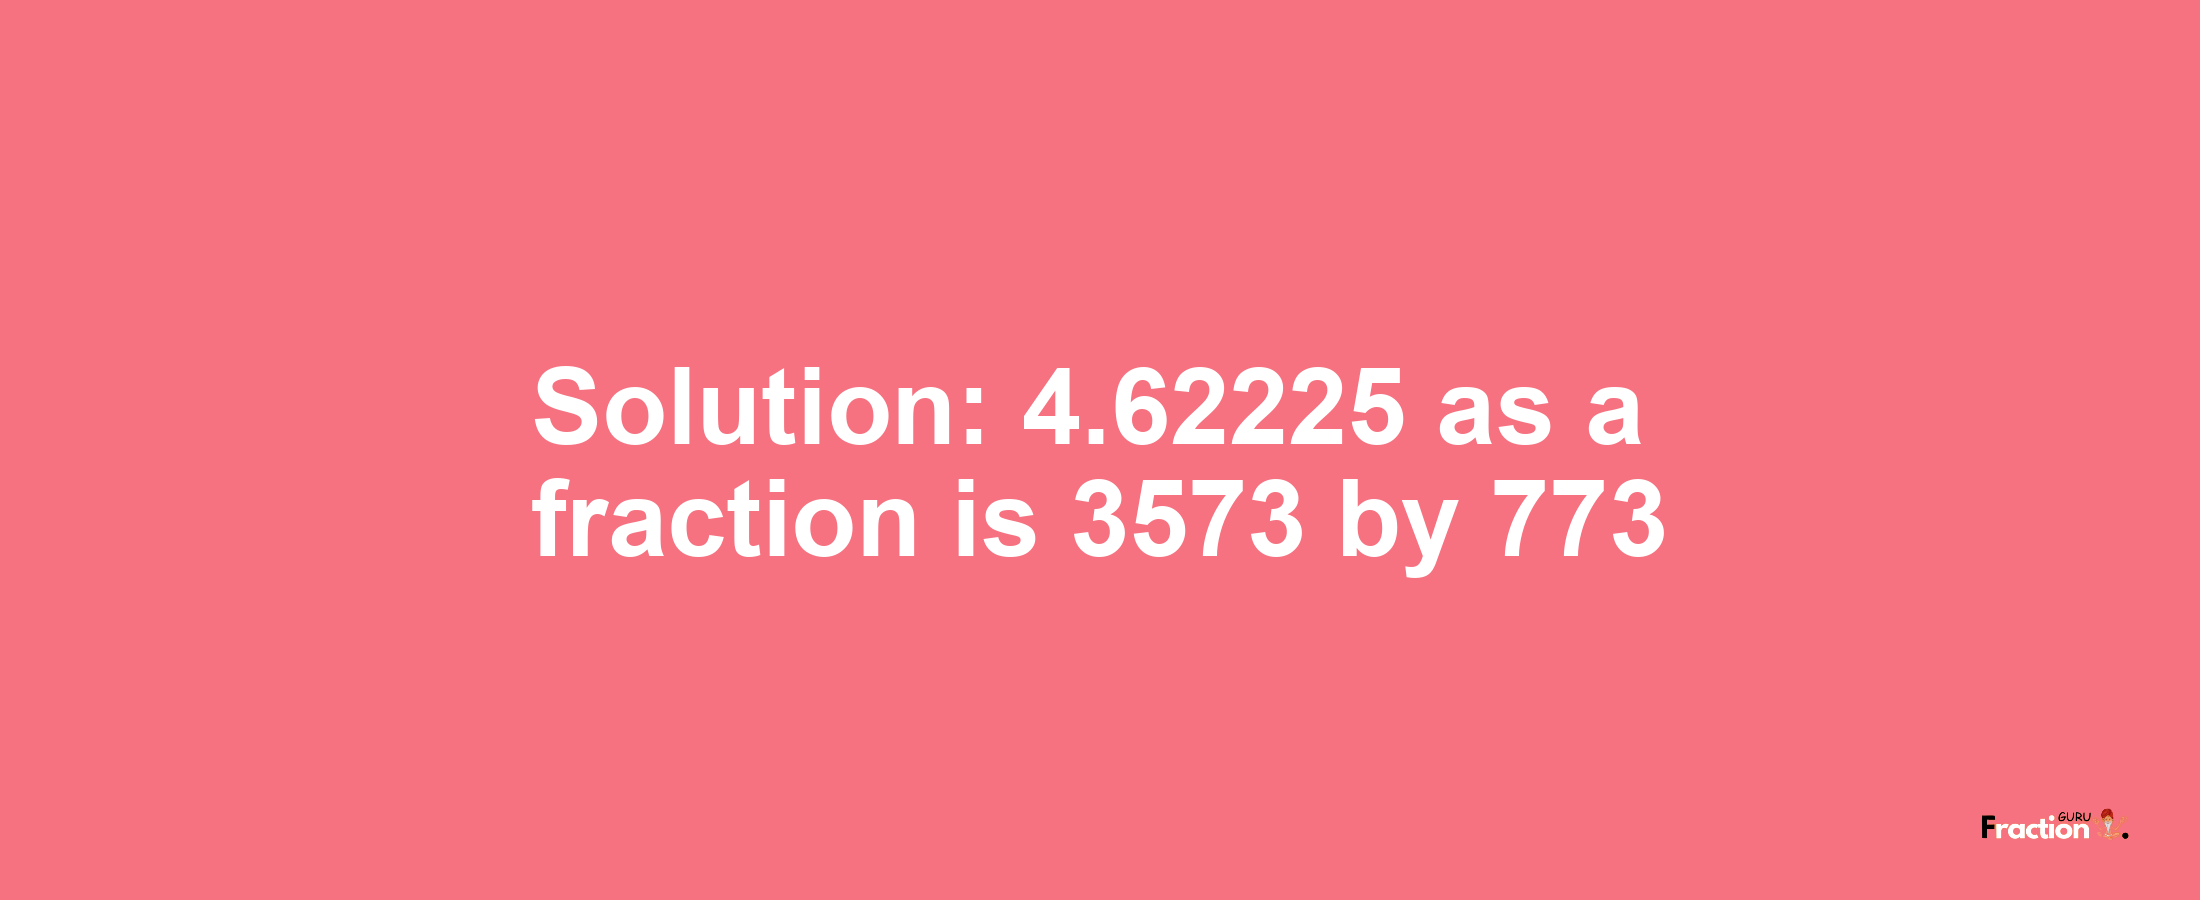 Solution:4.62225 as a fraction is 3573/773